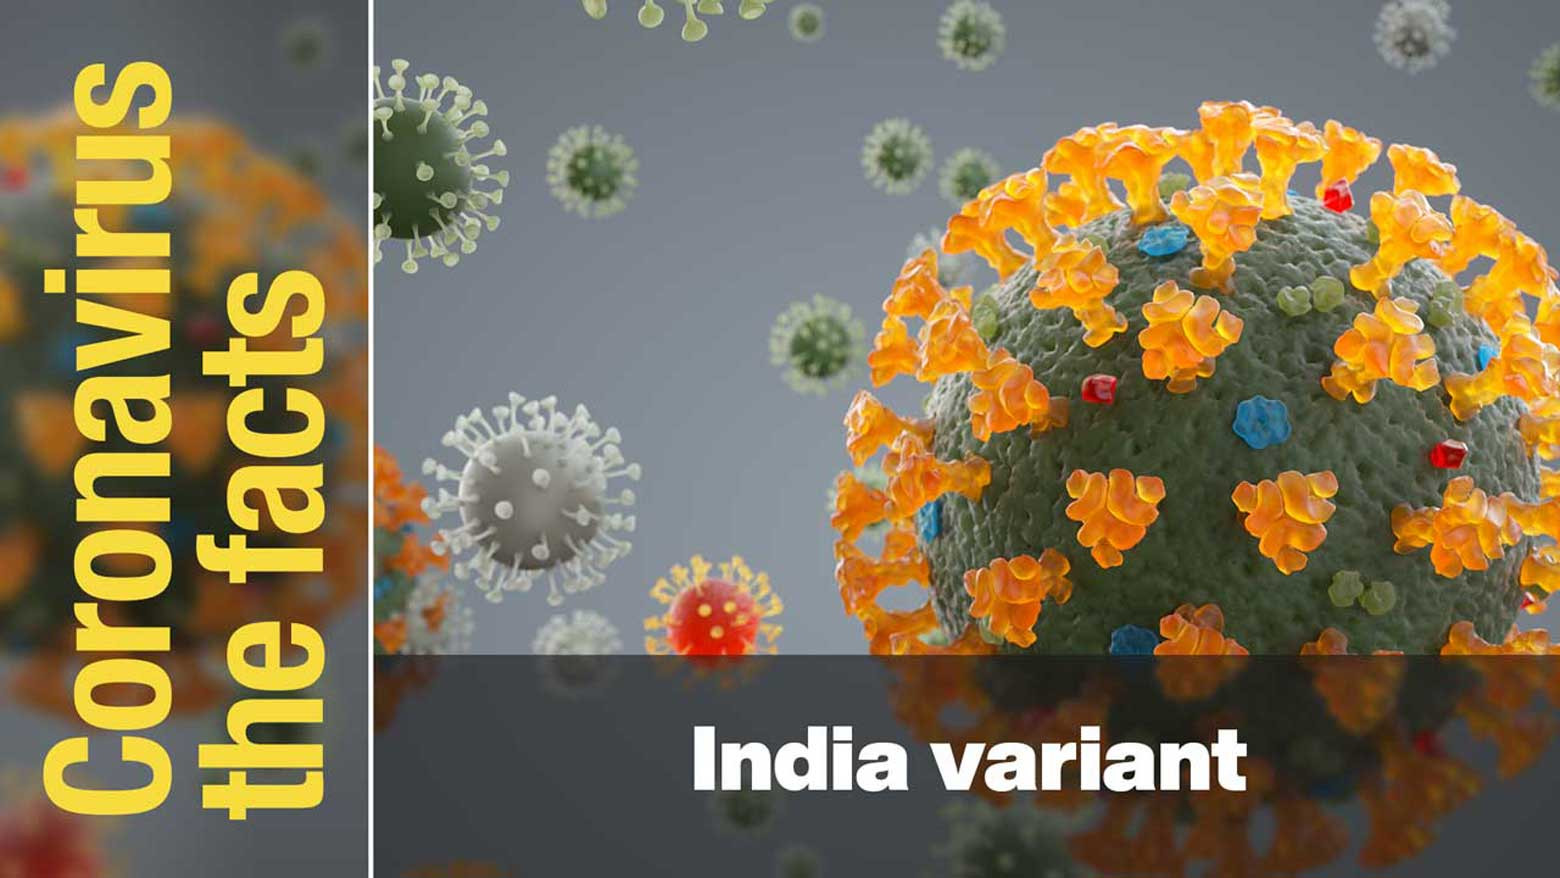 What are the characteristics of the variant detected in India?